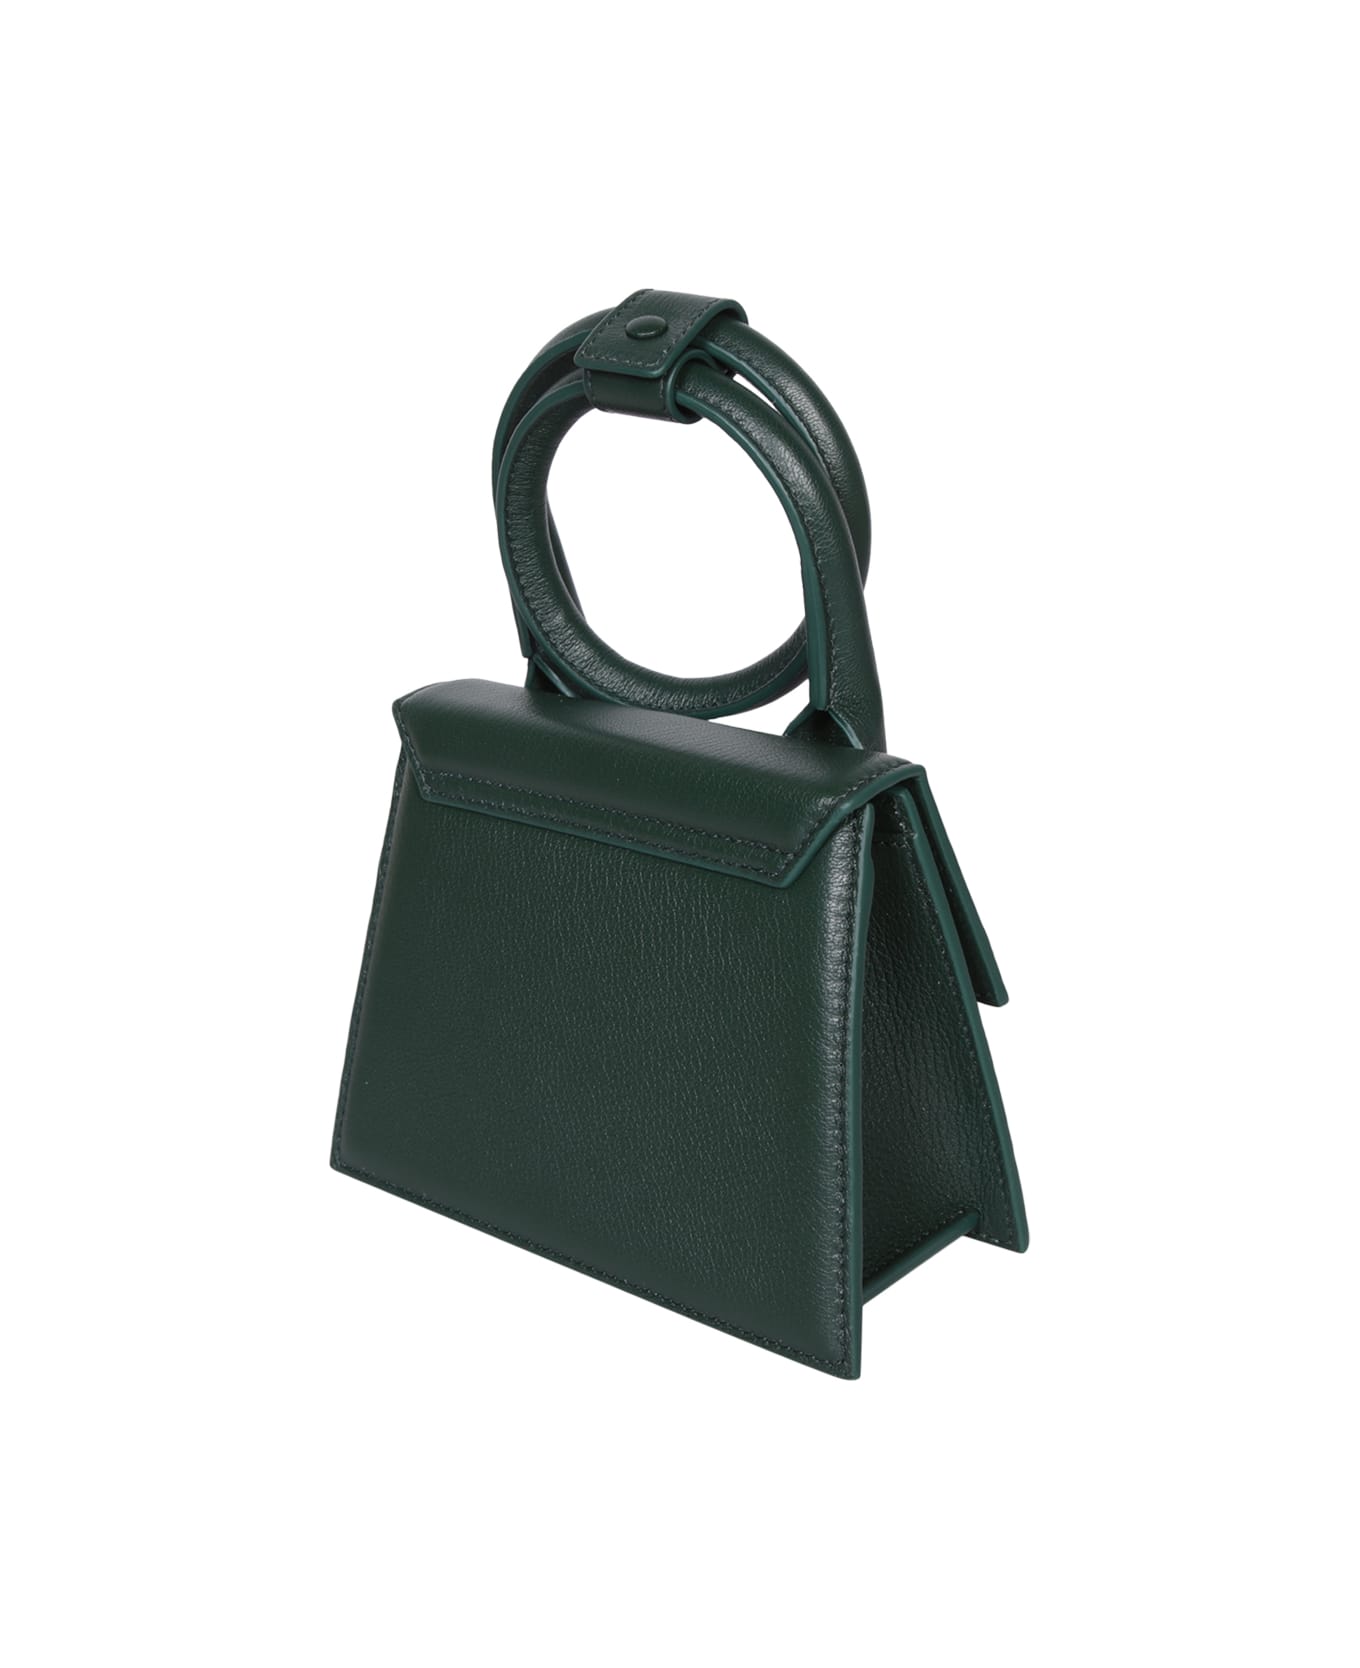 Jacquemus Le Chiquito Noeud Leather Shoulder Bag - Green トートバッグ